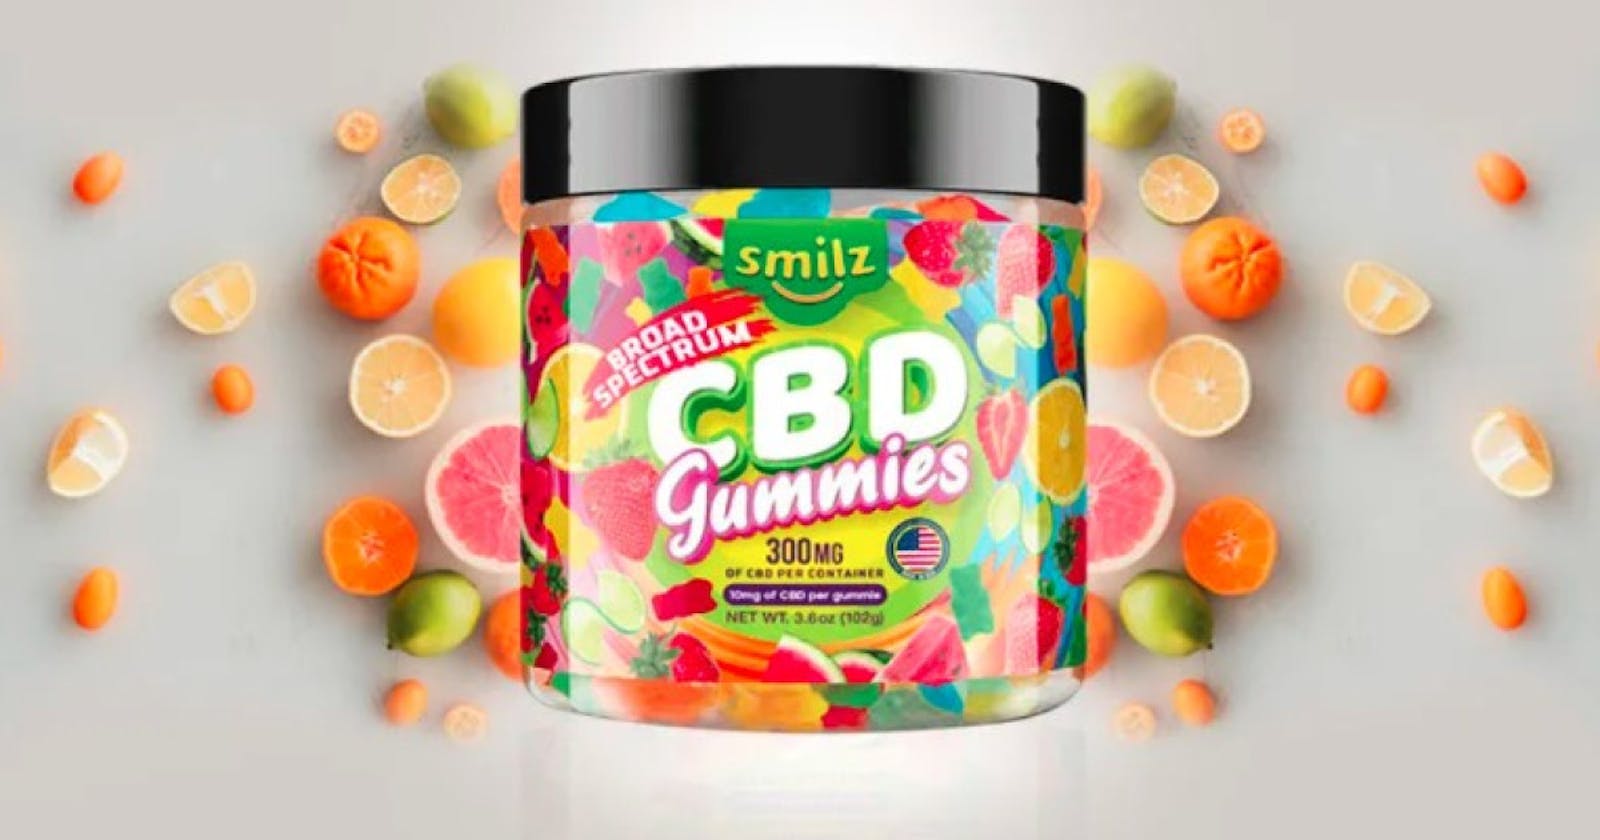 Sleep Better and Wake Up Refreshed with Steven Gundry CBD Gummies!